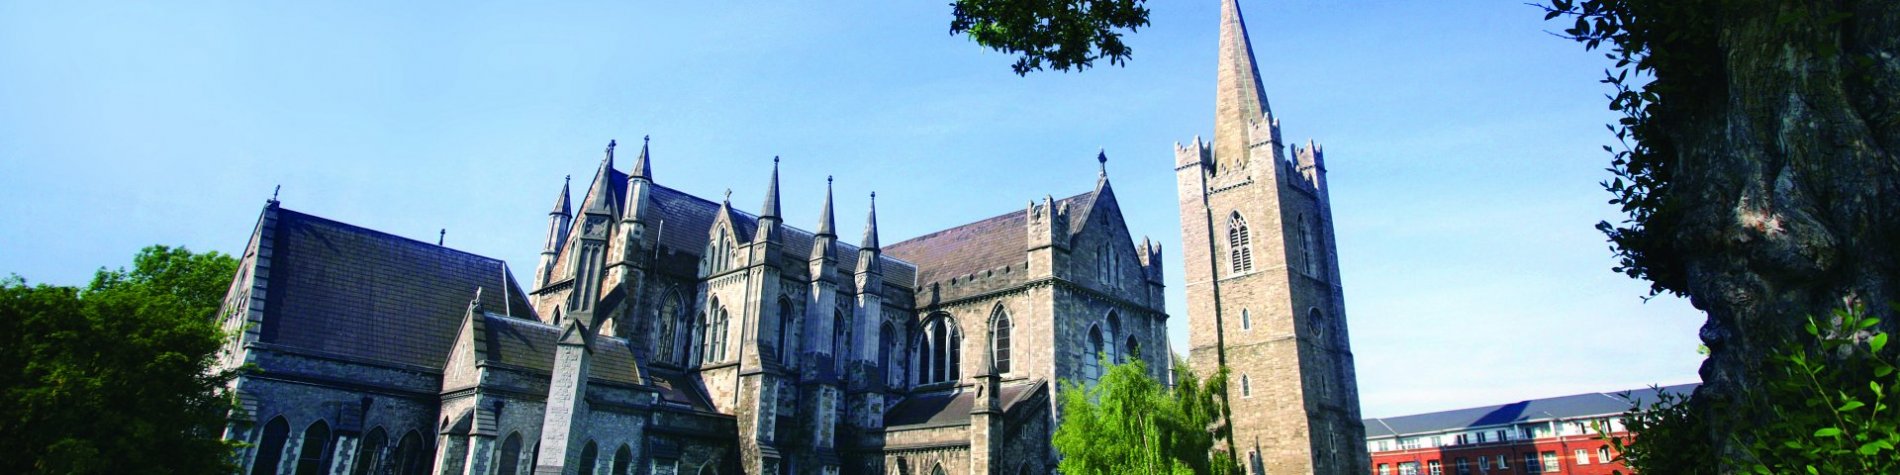 View of St. Patrick's Cathedral - Dublin's biggest church